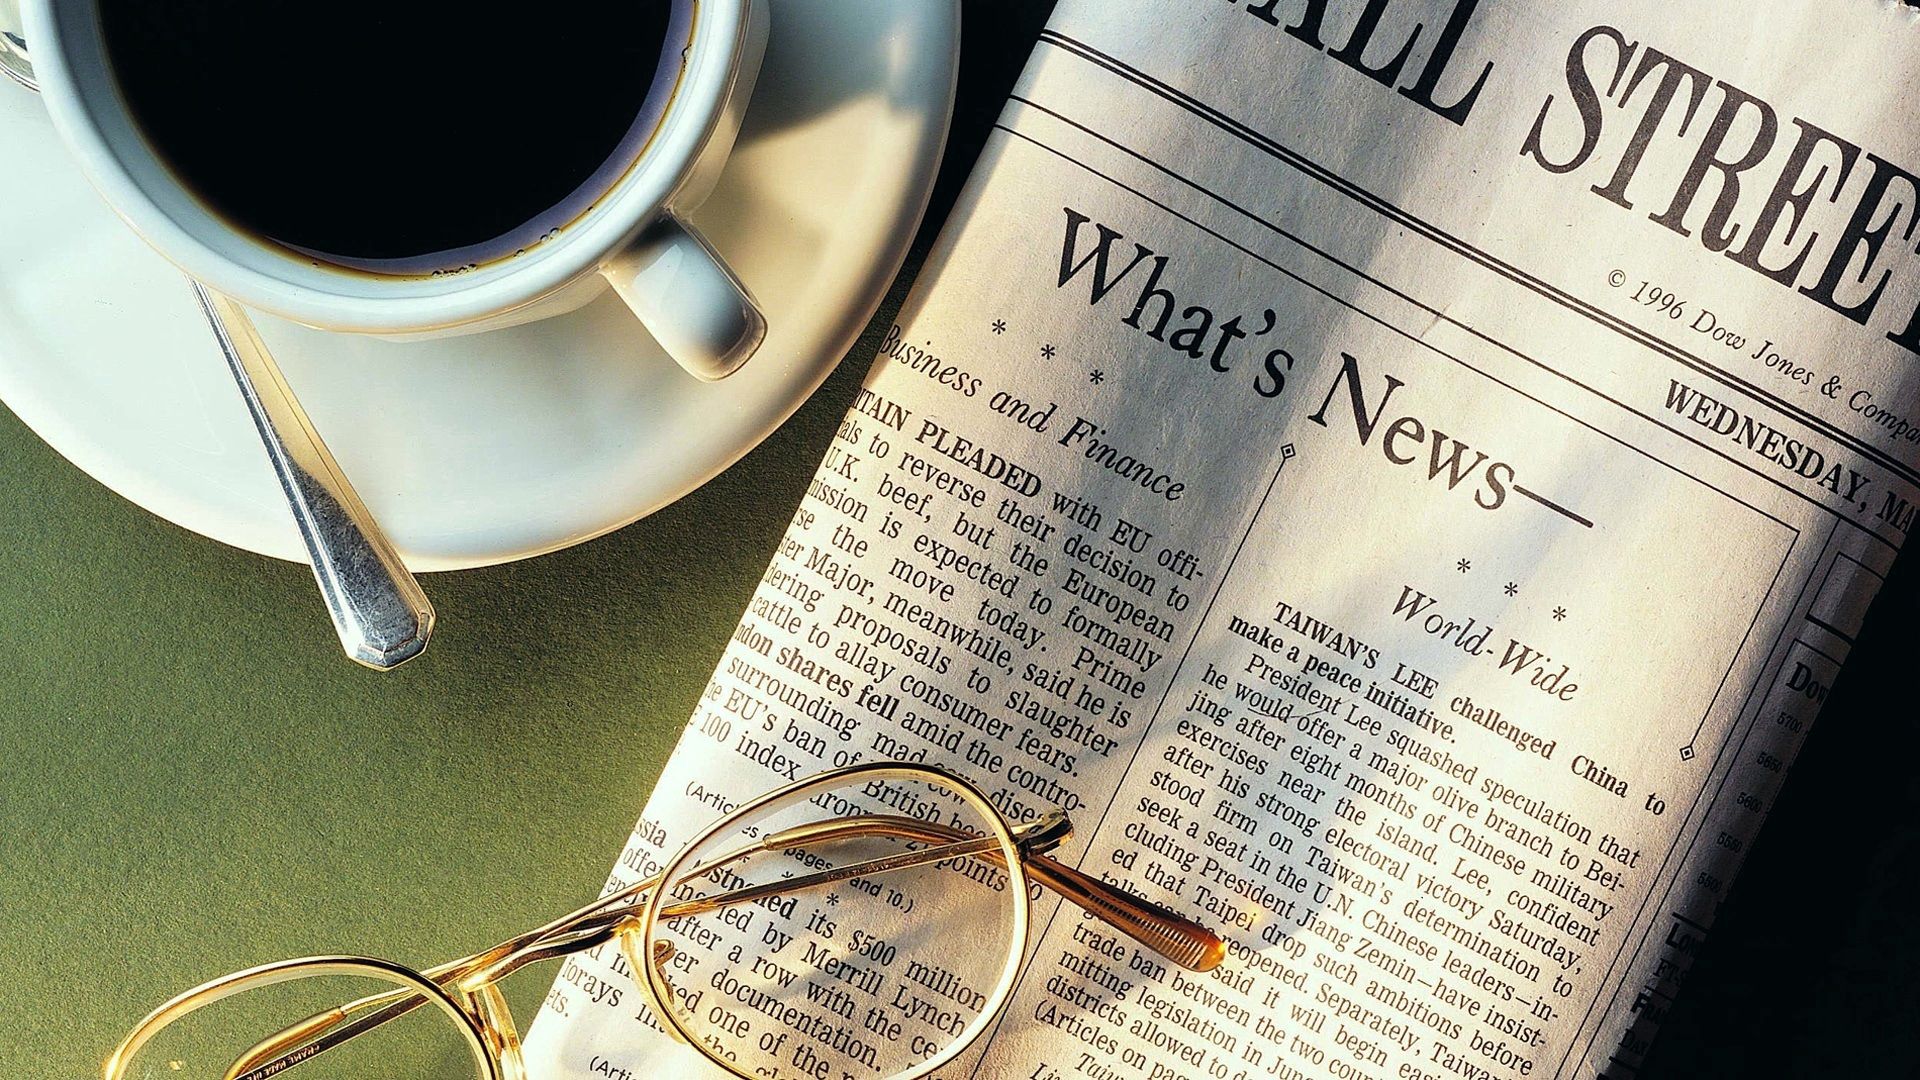 coffee, food, cup, glasses, spectacles, newspaper, spoon, news, cup holder